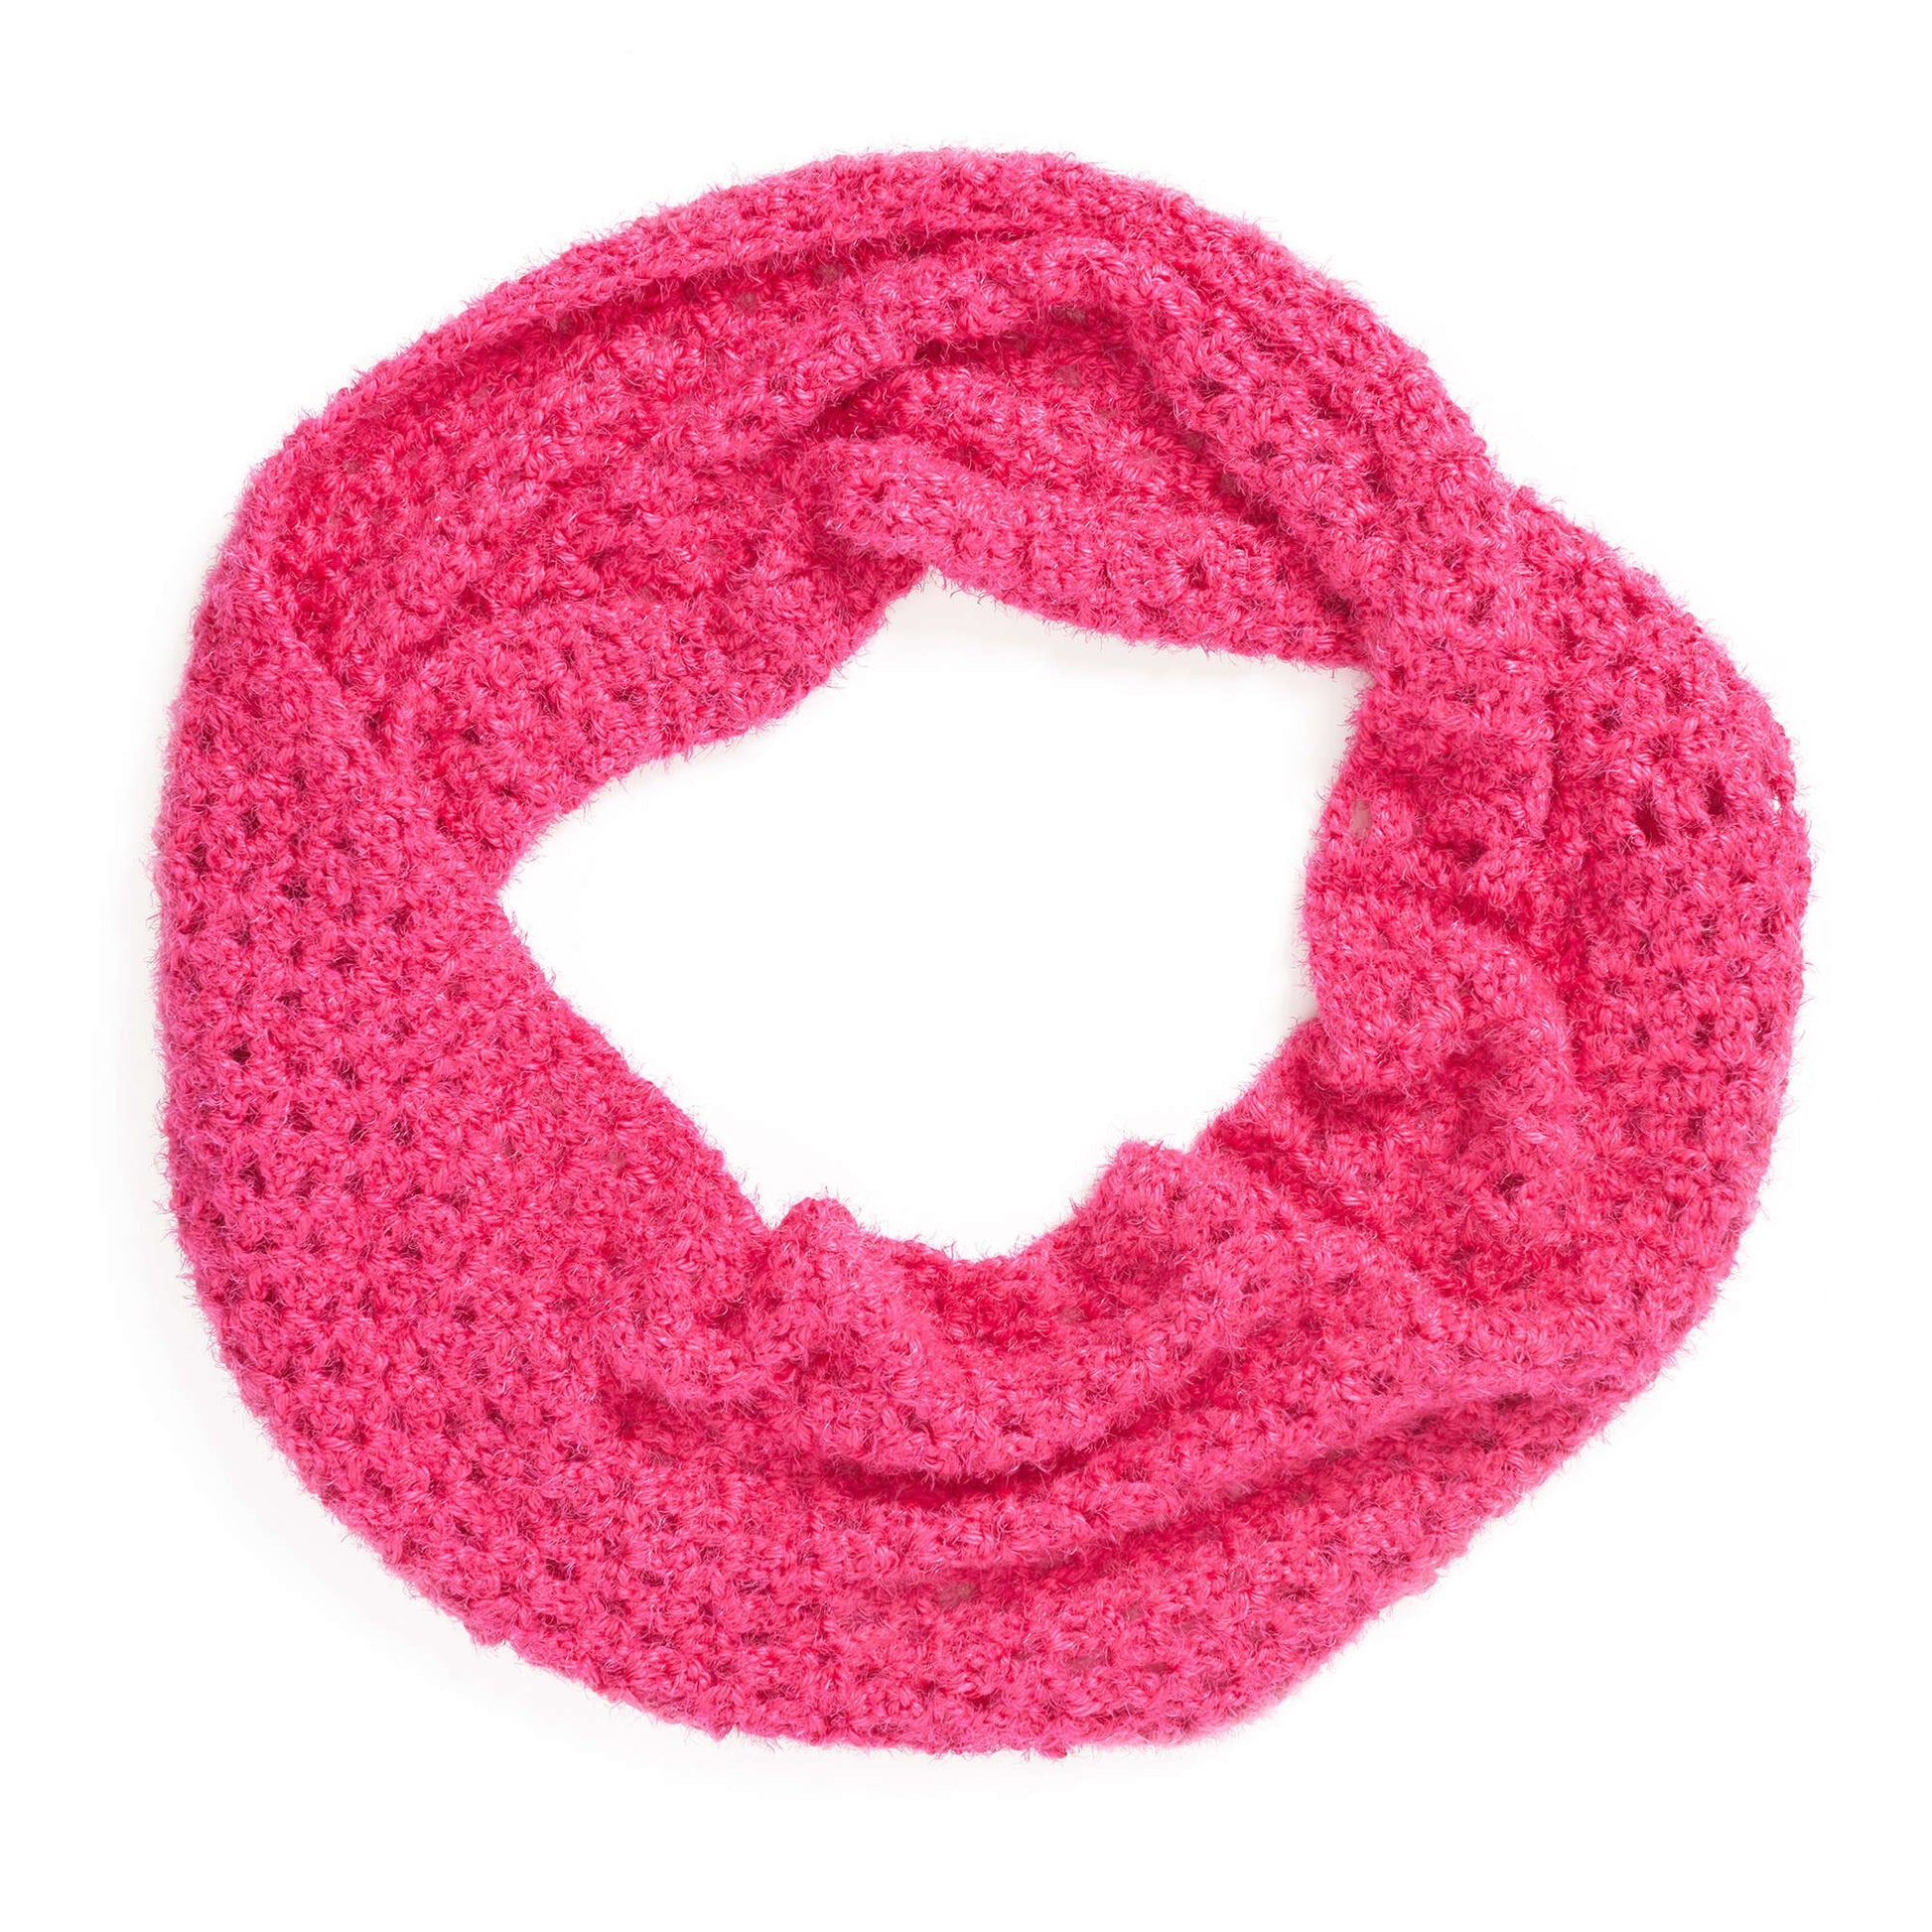 Free Red Heart Soft And Squishy Cowl Crochet Pattern